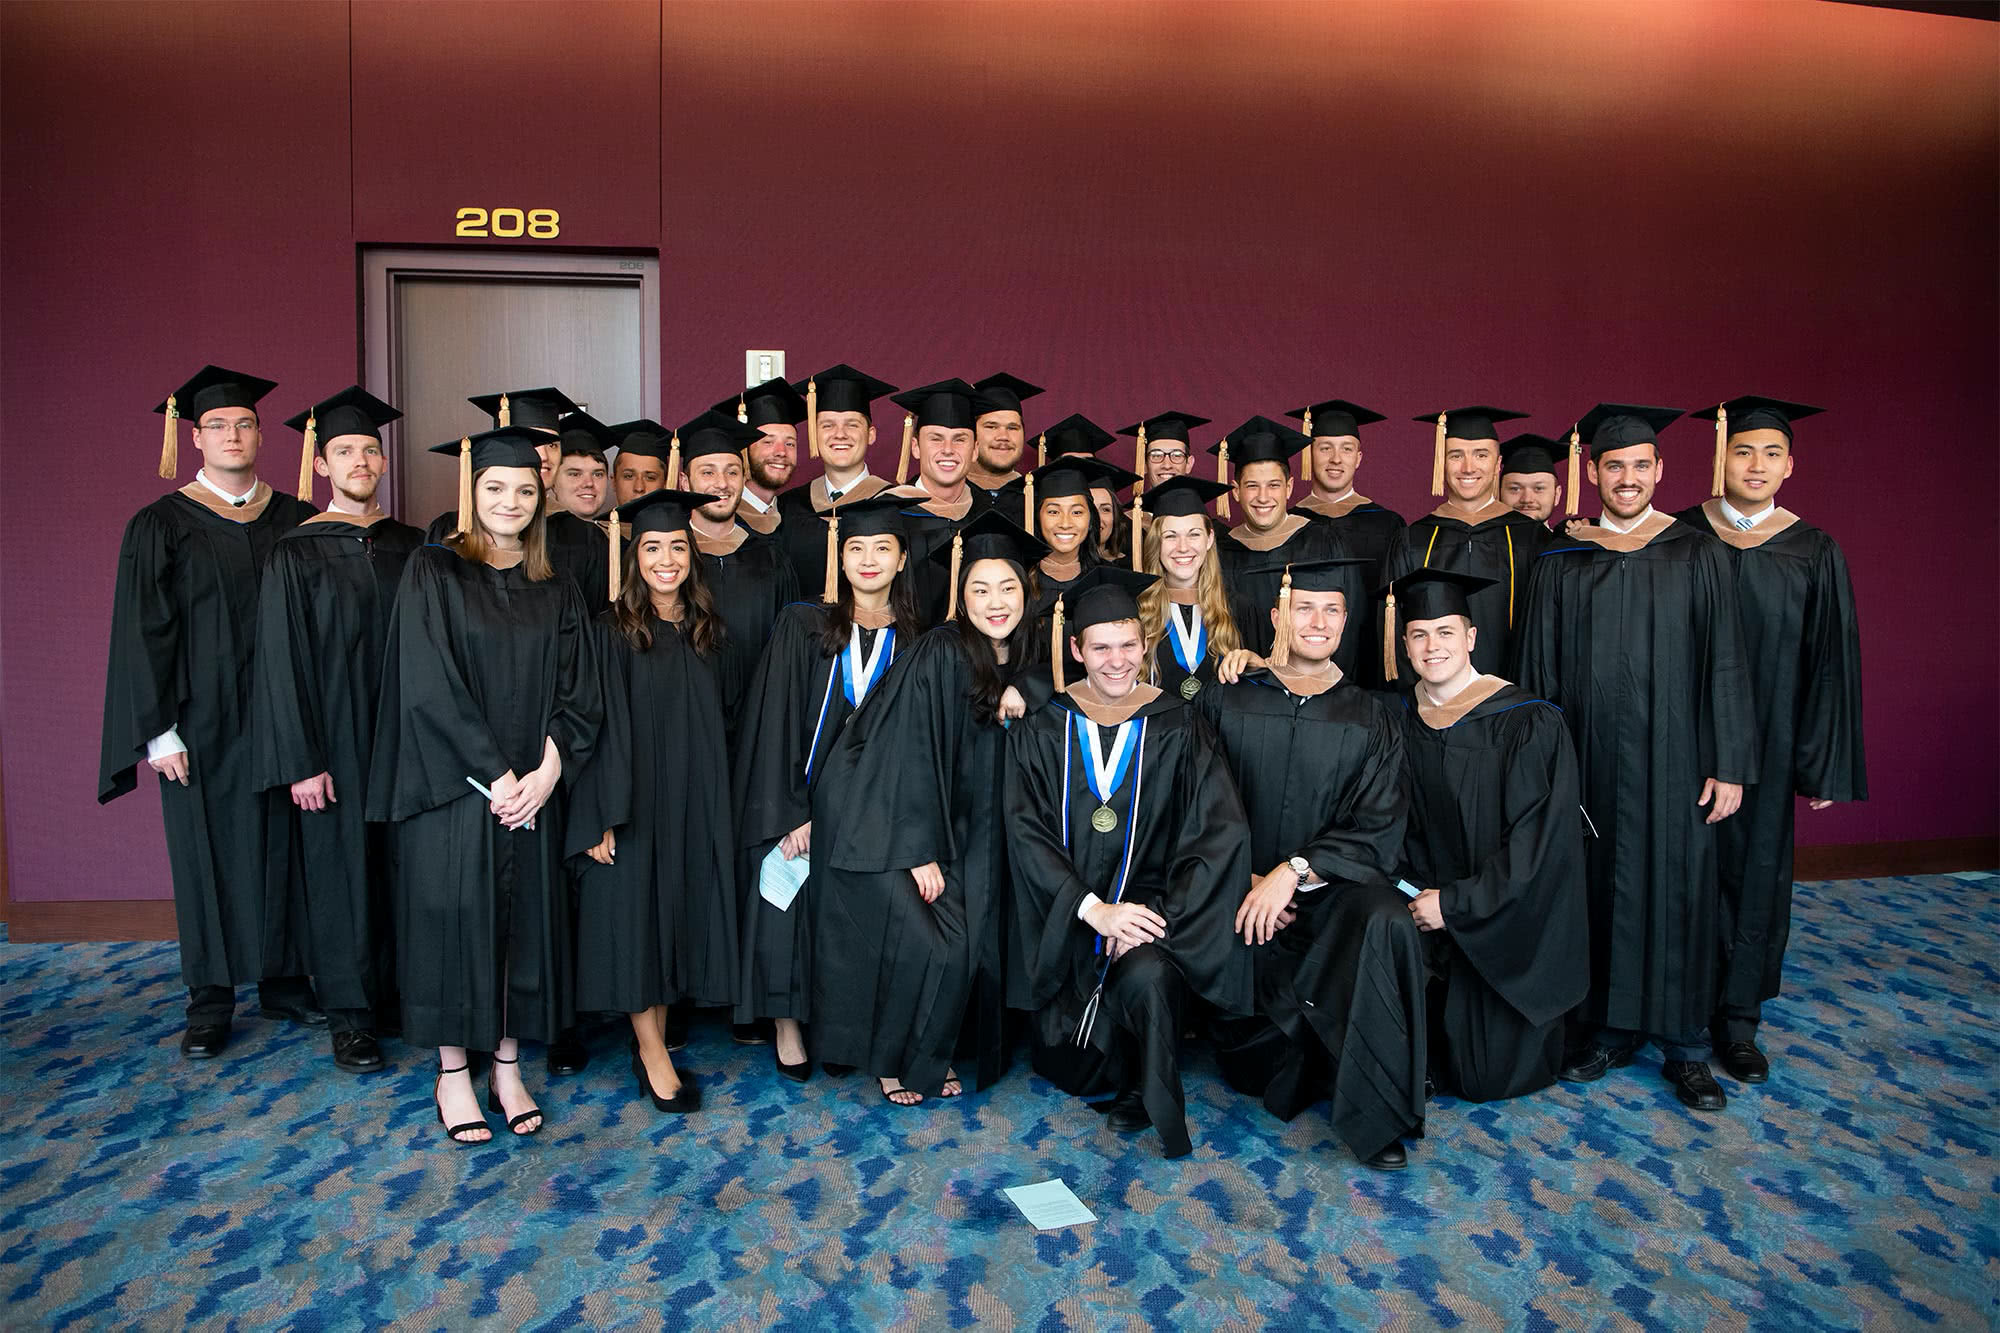 A group of business graduates pose together before graduation starts